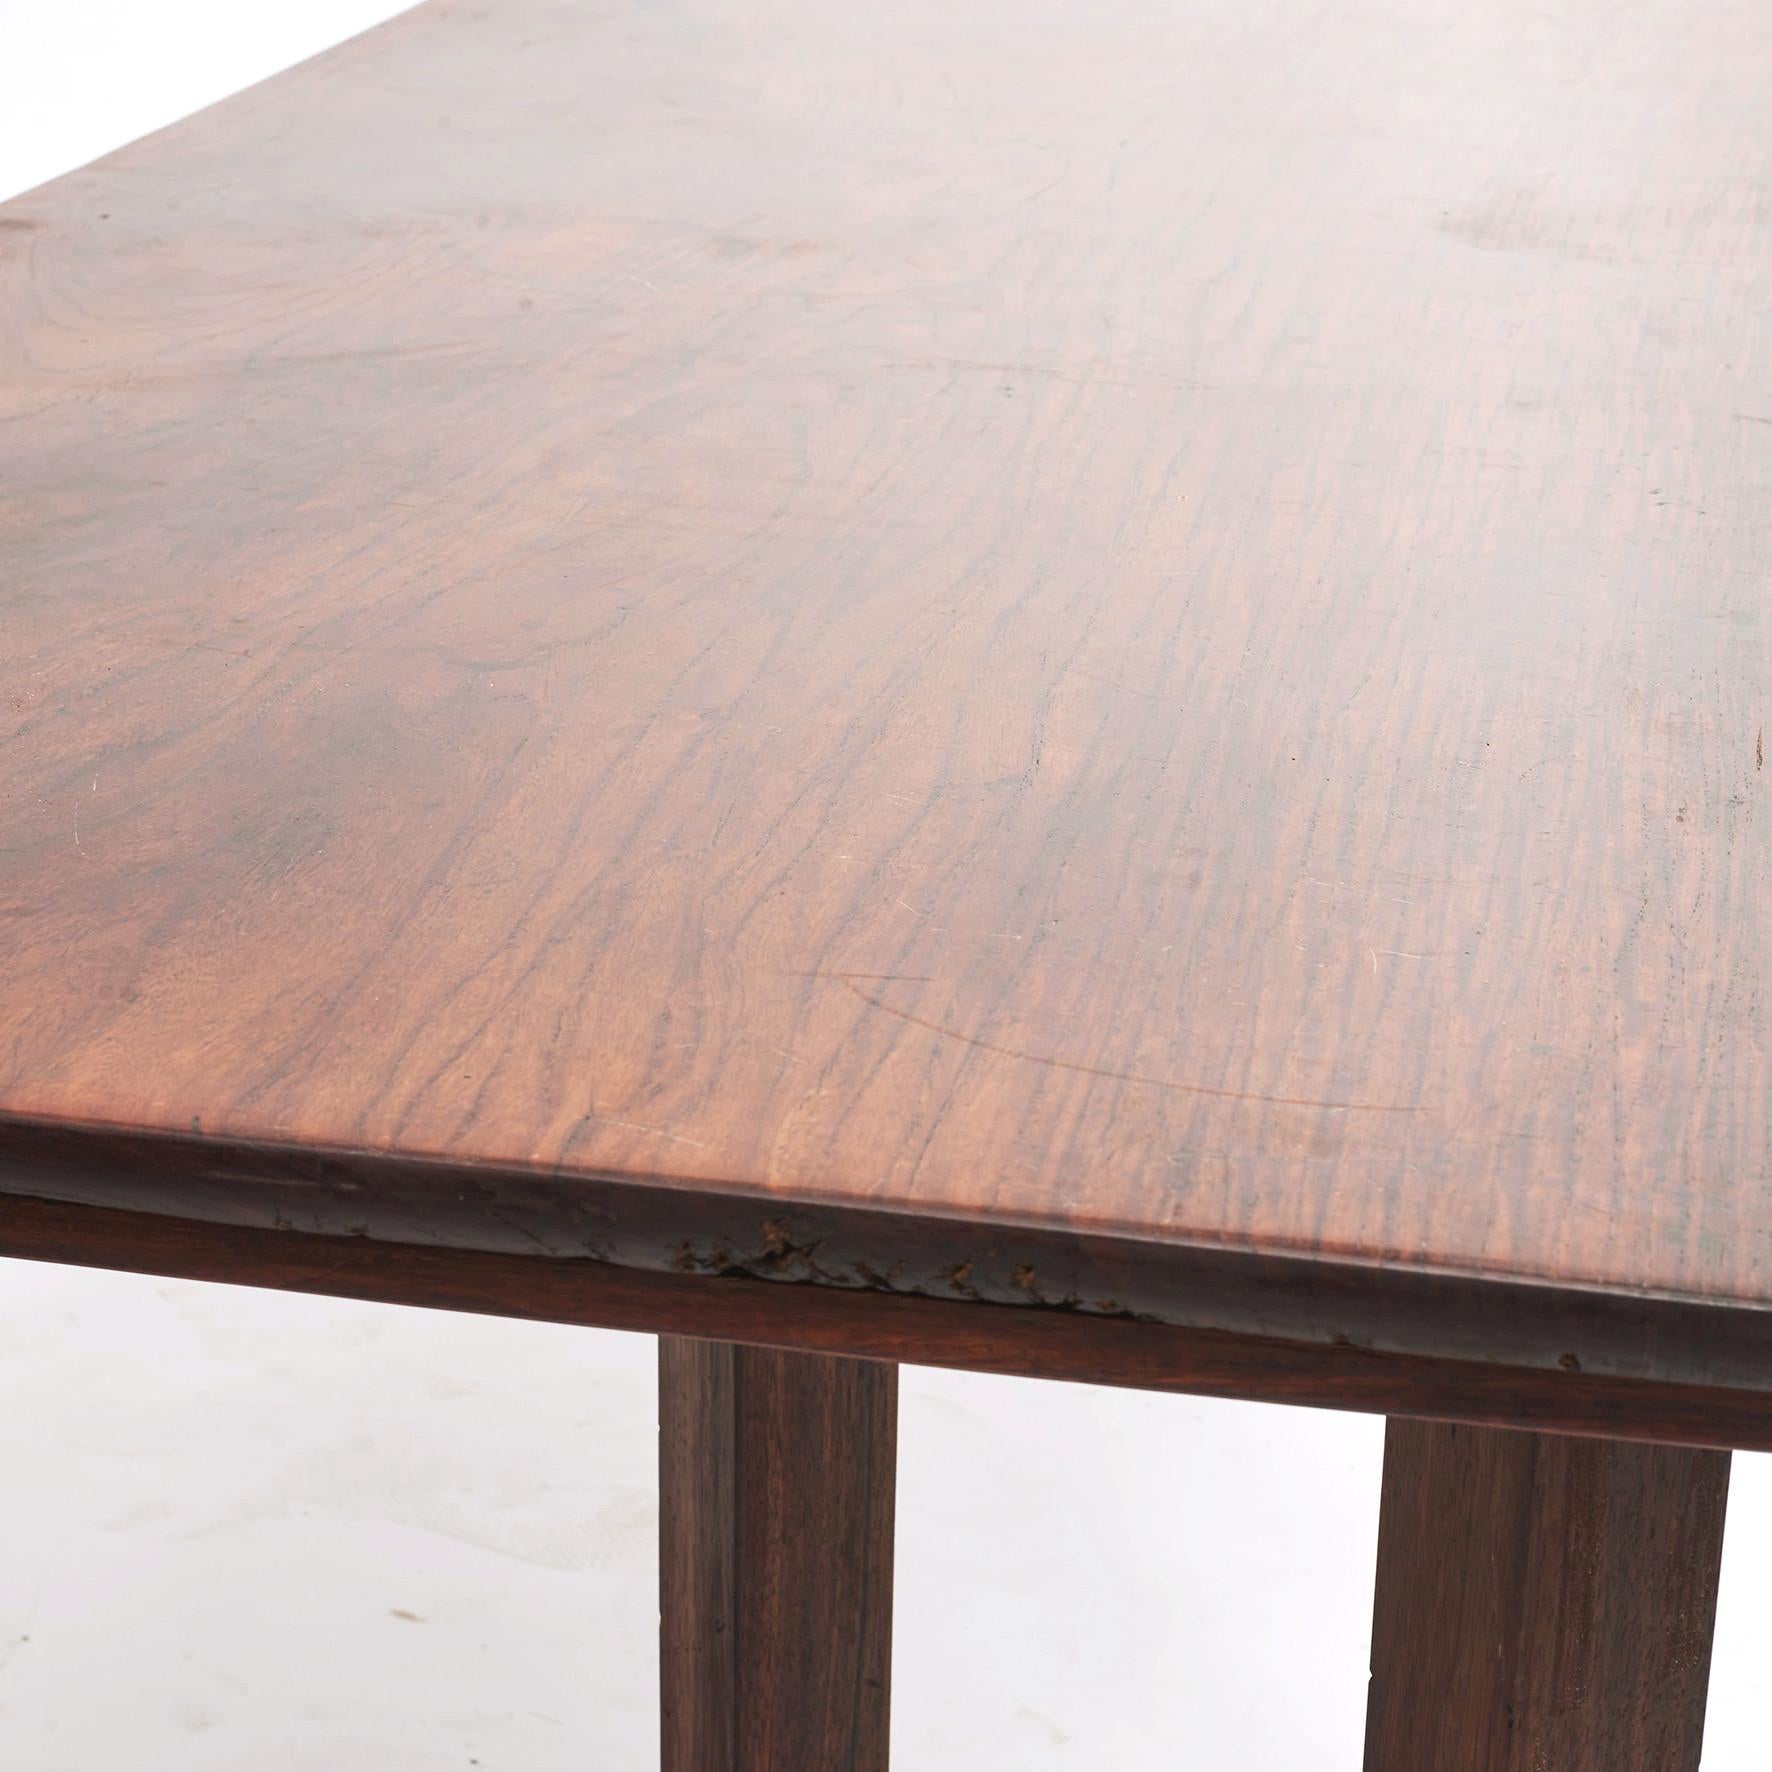 Long dining table crafted in Narra hardwood.
Tabletop made of one-piece of wood with beautiful grain. Profiled table edge.
The tabletop is resting on six cubist style legs with pierced 